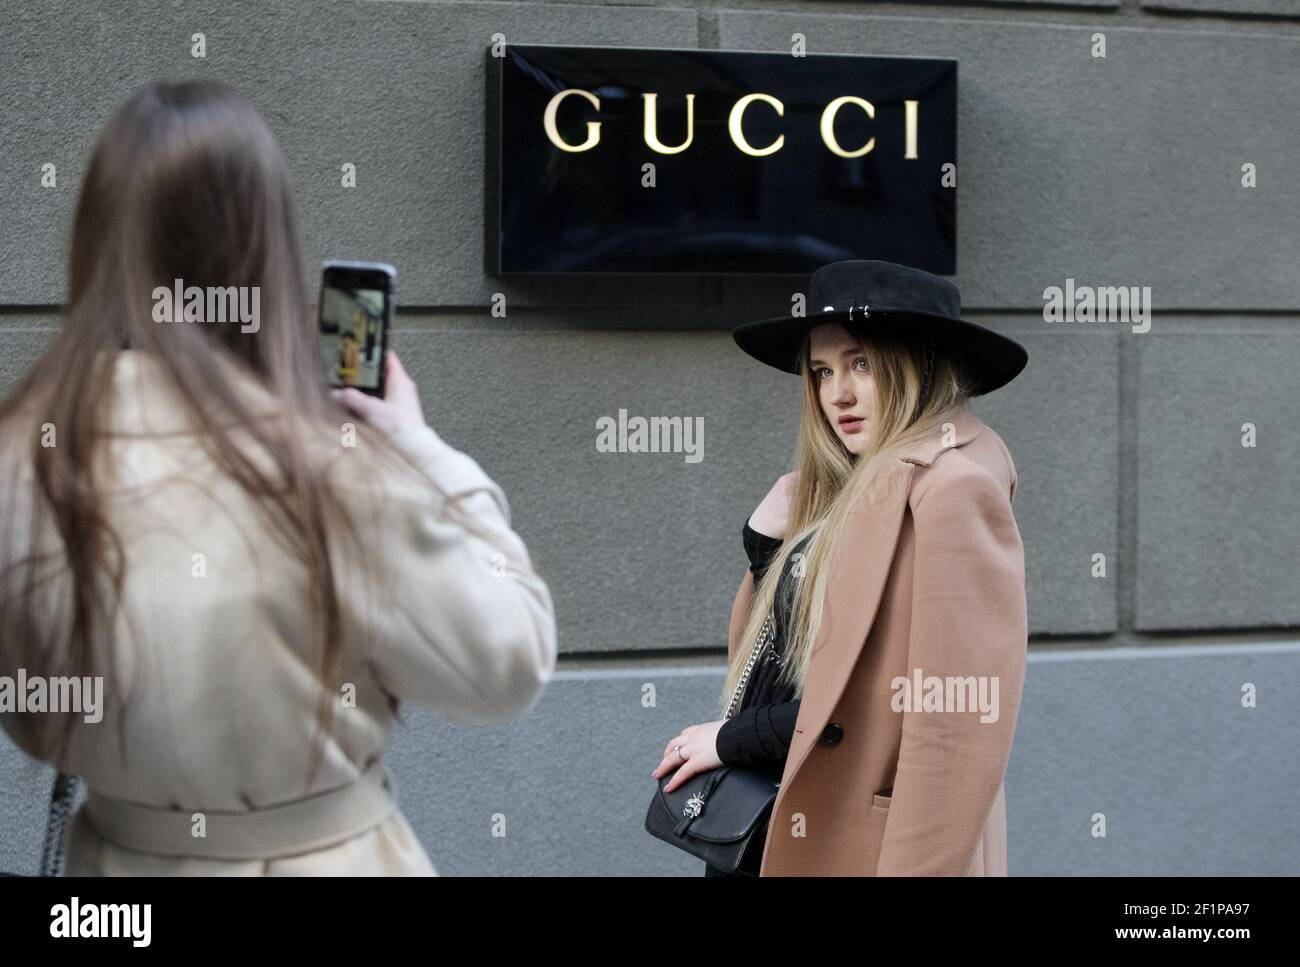 Kiev, Ukraine. 6th Mar, 2021. A young woman poses for a photo in front of  Gucci logo, of a luxury fashion house, outside a Gucci brand store. Credit:  Pavlo Gonchar/SOPA Images/ZUMA Wire/Alamy